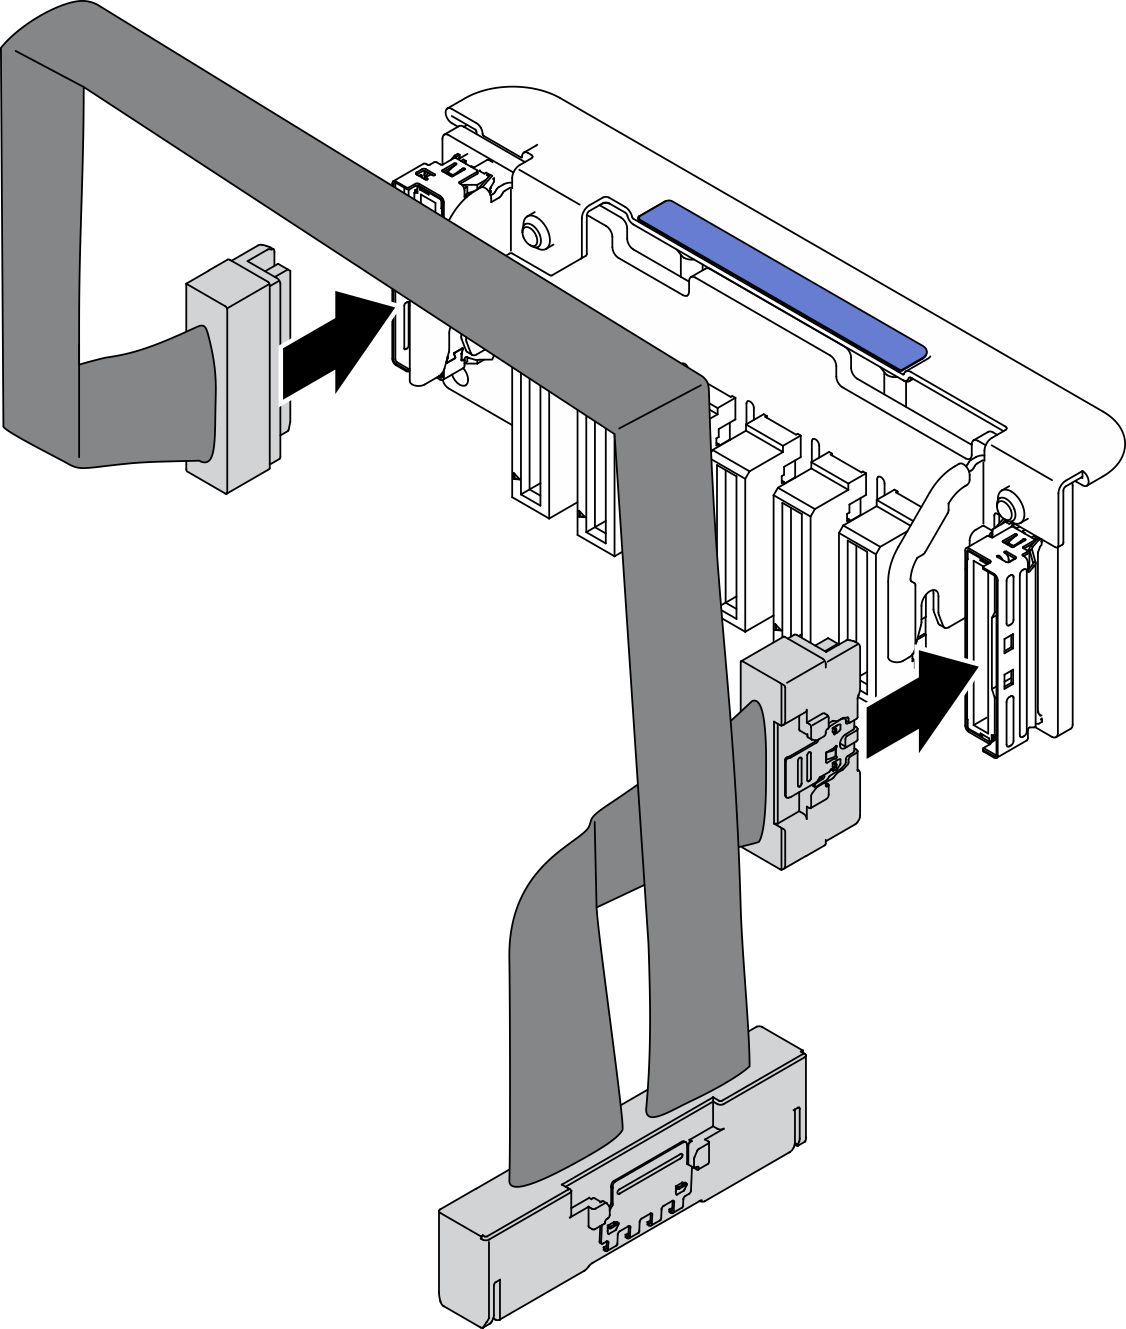 Connecting cable to the EDSFF drive backplane